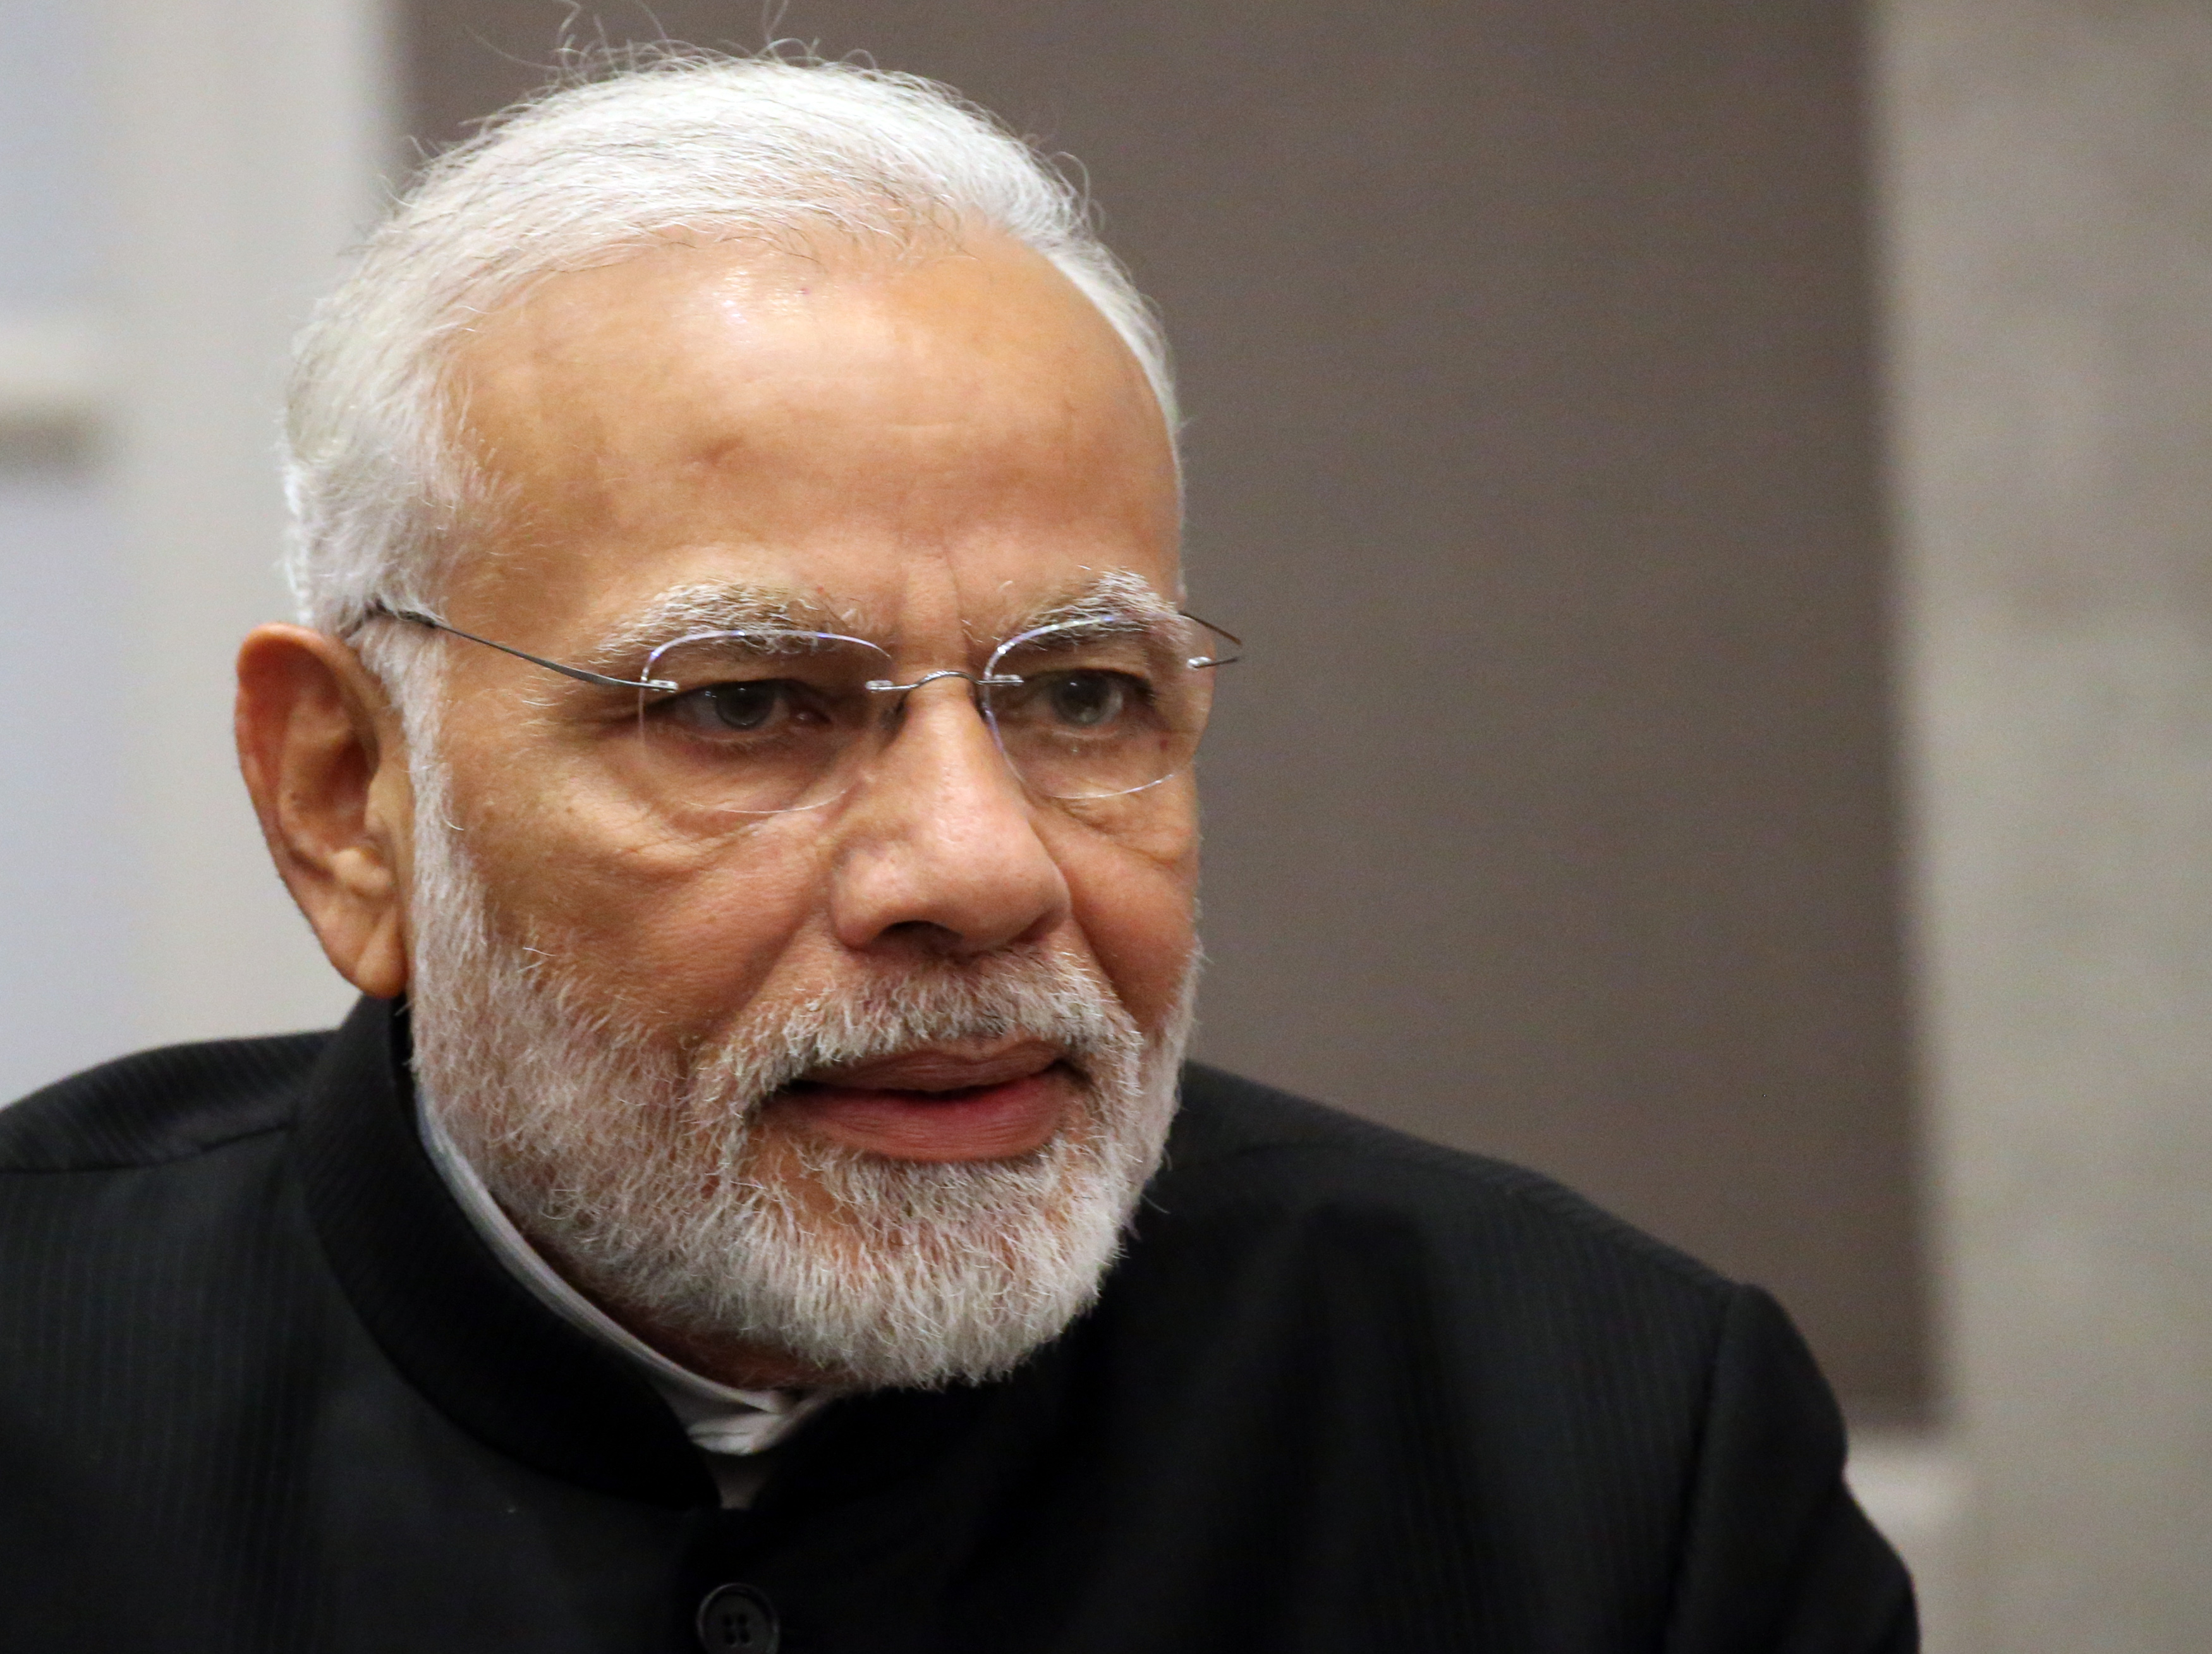 India's Prime Minister Narendra Modi alongside claim of country free of open defecation